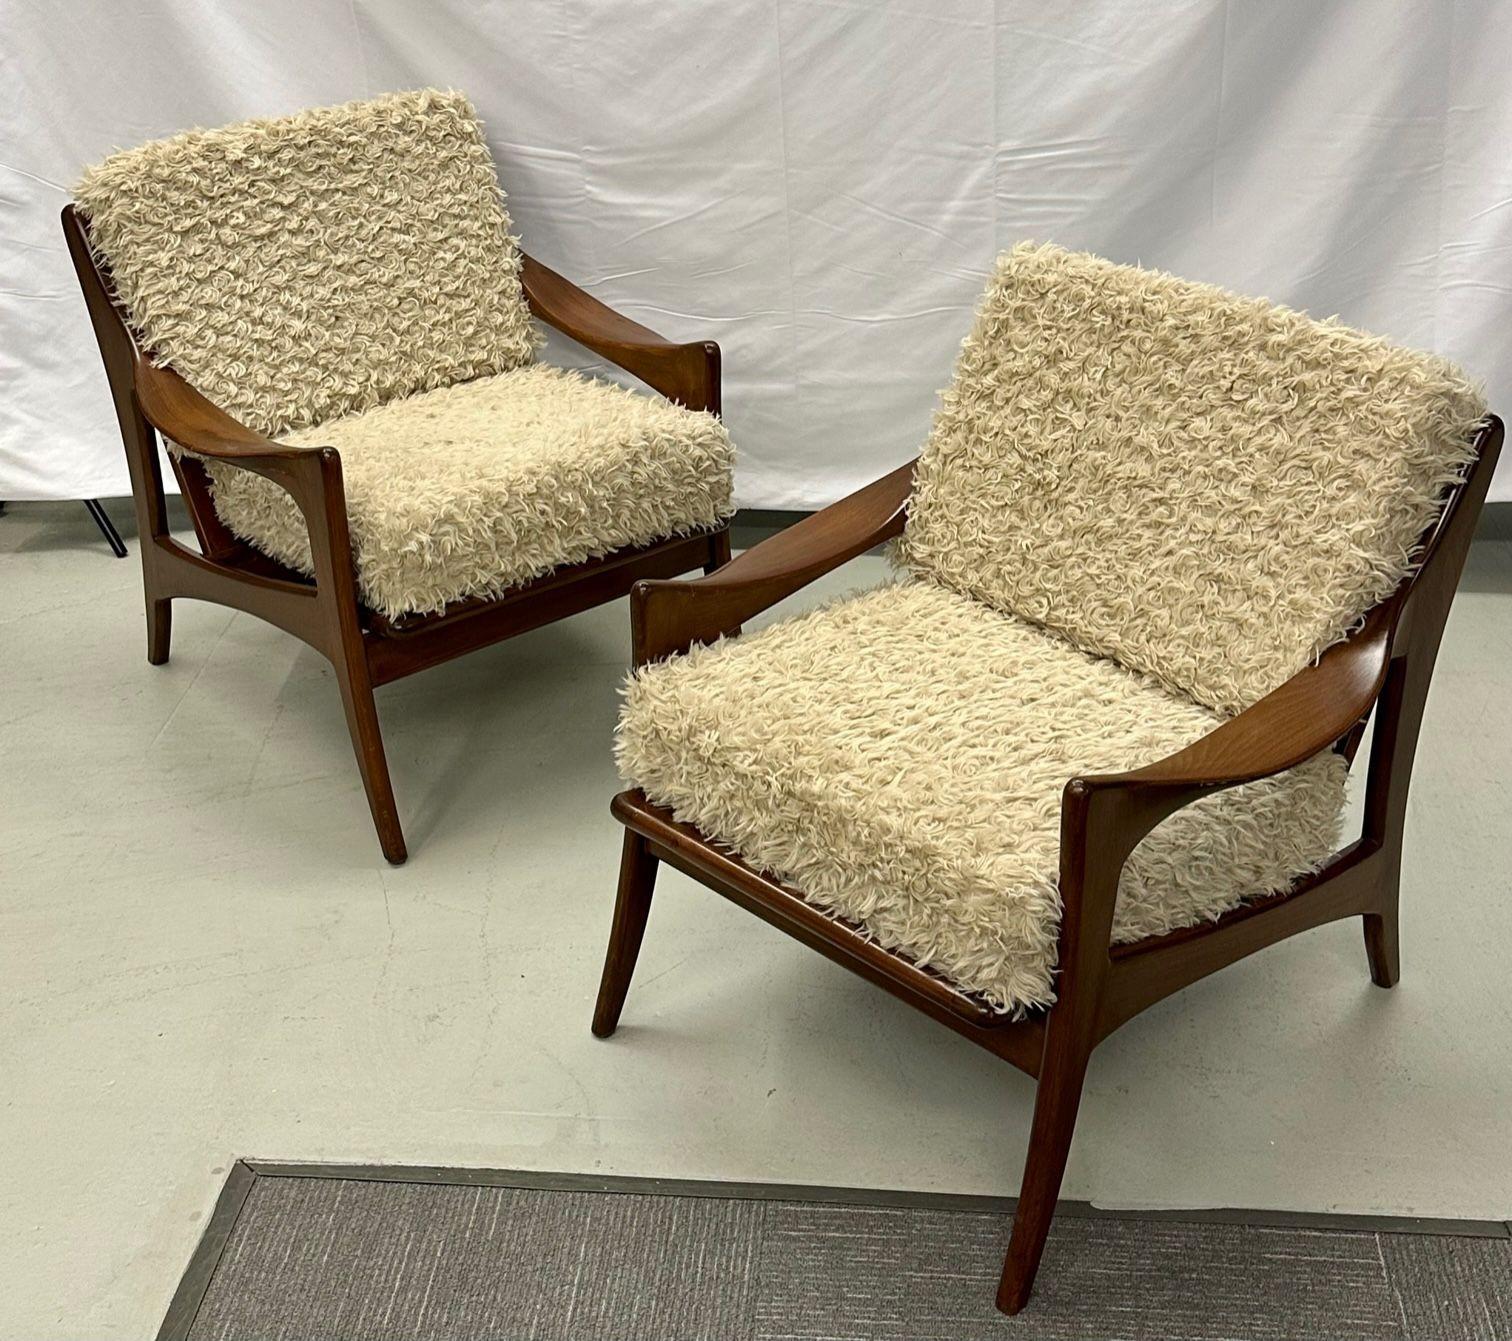 Pair of Dutch Mid-Century Modern style arm / lounge chairs, teak, brass
Pair of modern lounge chairs having a solid organc shape teak frame with brass accents. The cushions are newly stuffed and finished in a shaggy faux fur fabric.
 
Teak,